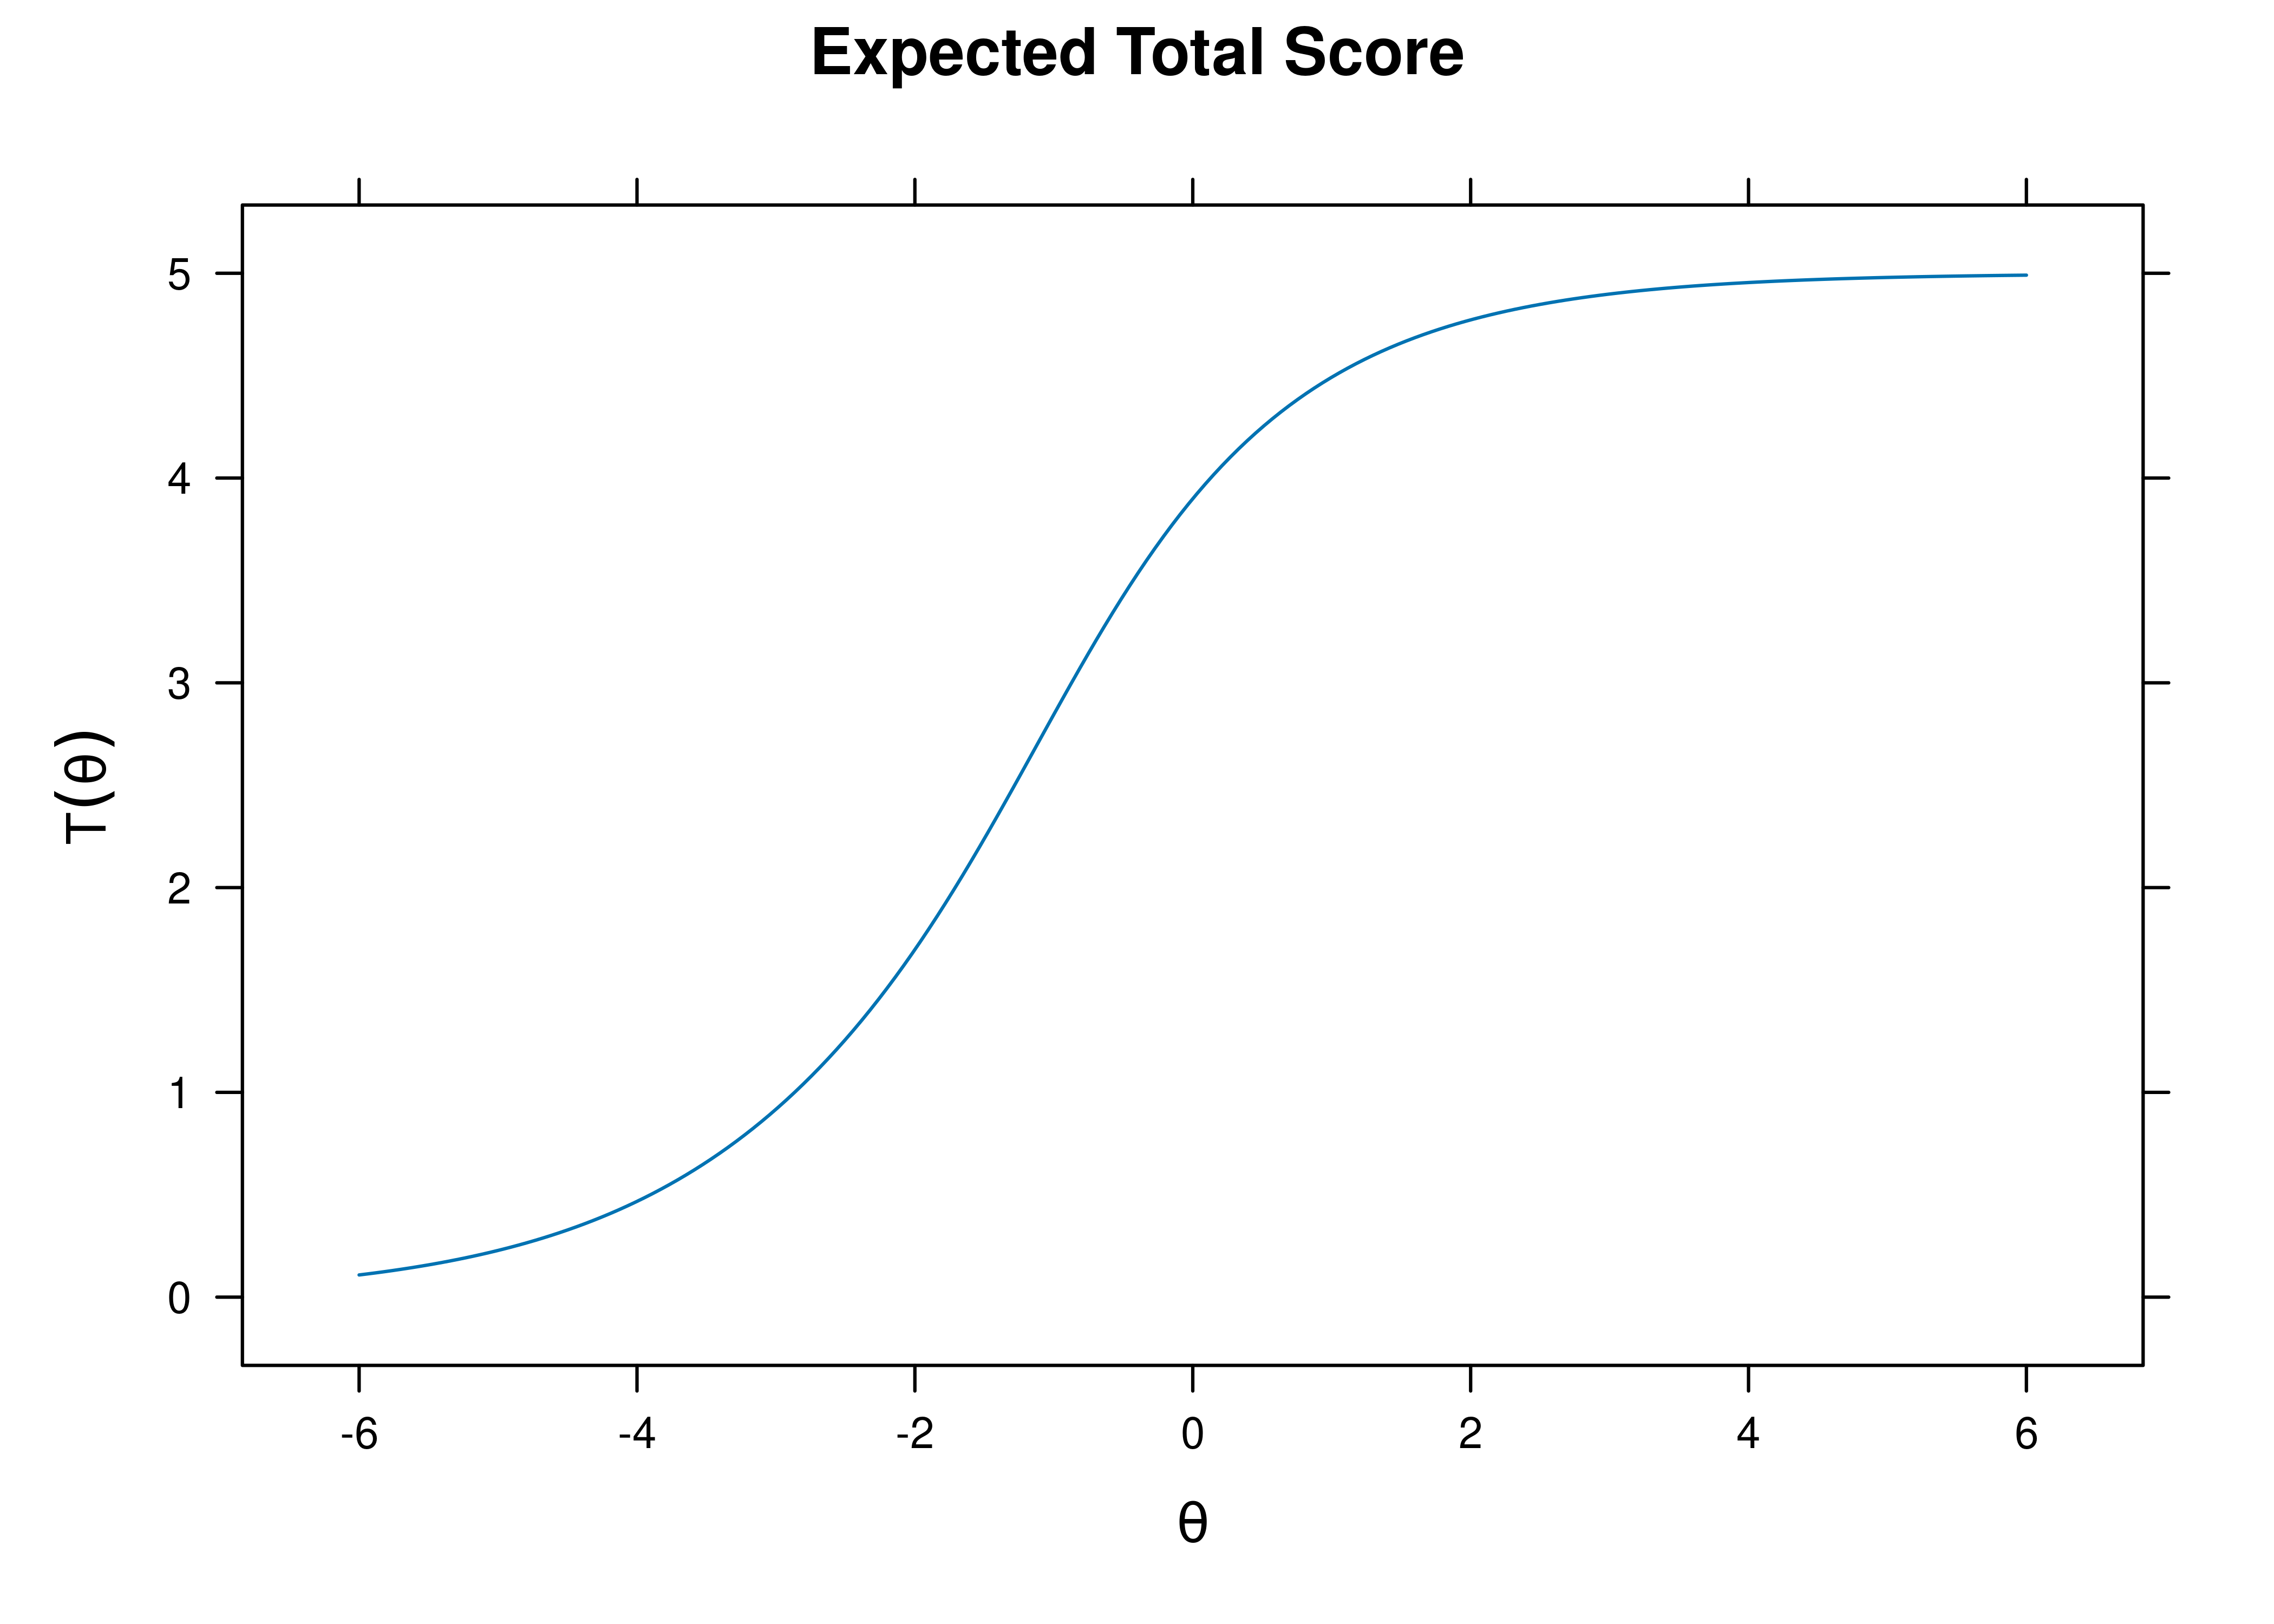 Test Characteristic Curve From Two-Parameter Logistic Item Response Theory Model.